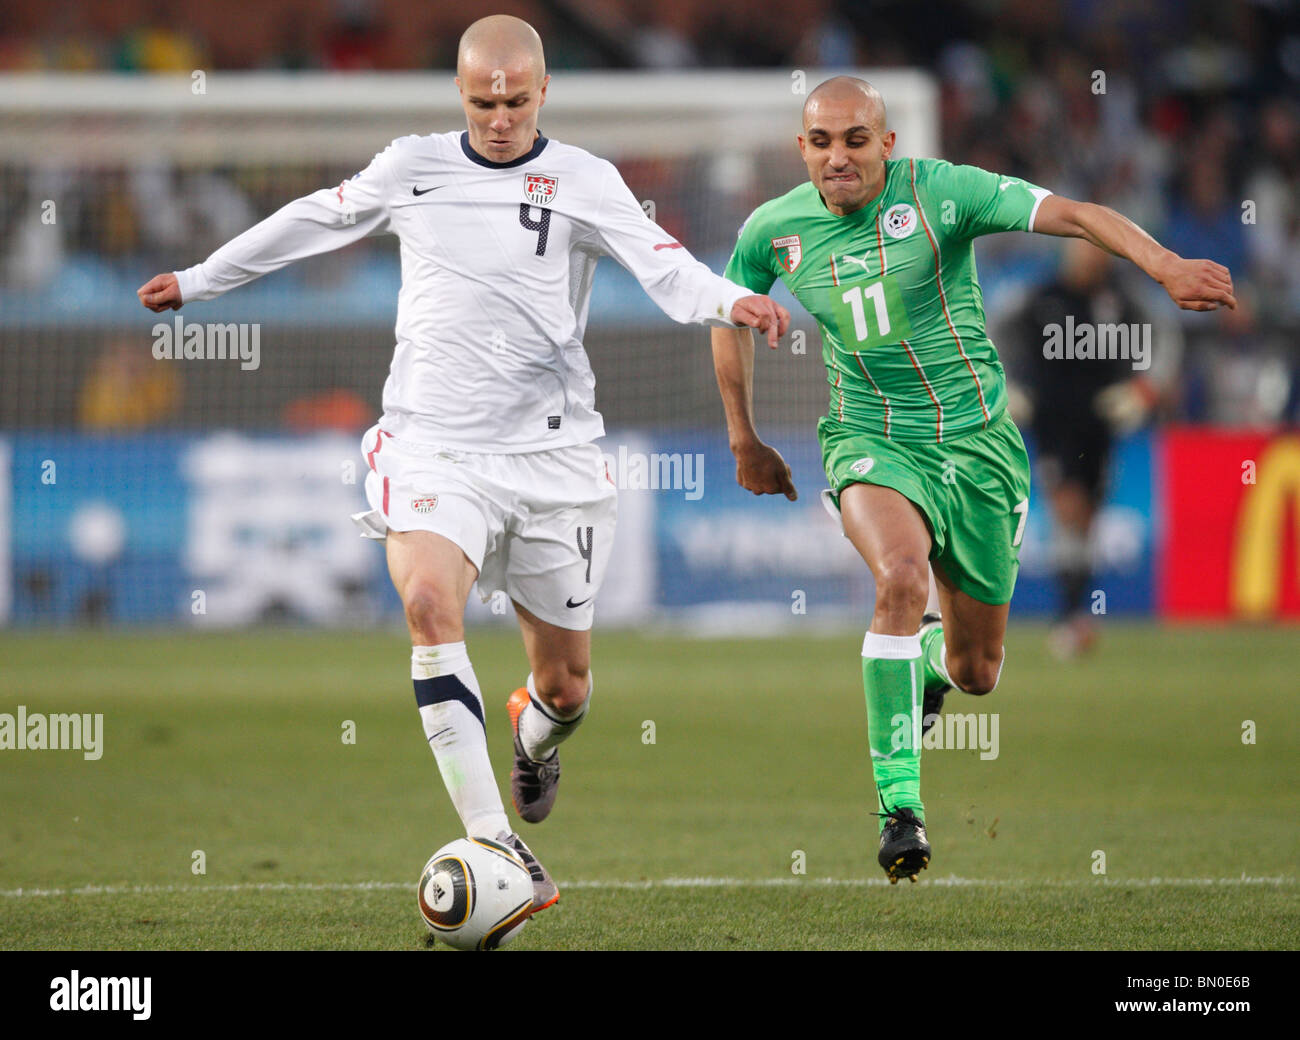 Michael Bradley of the United States (4) drives the ball against Rafik Djebbour of Algeria (11) during a 2010 World Cup match. Stock Photo